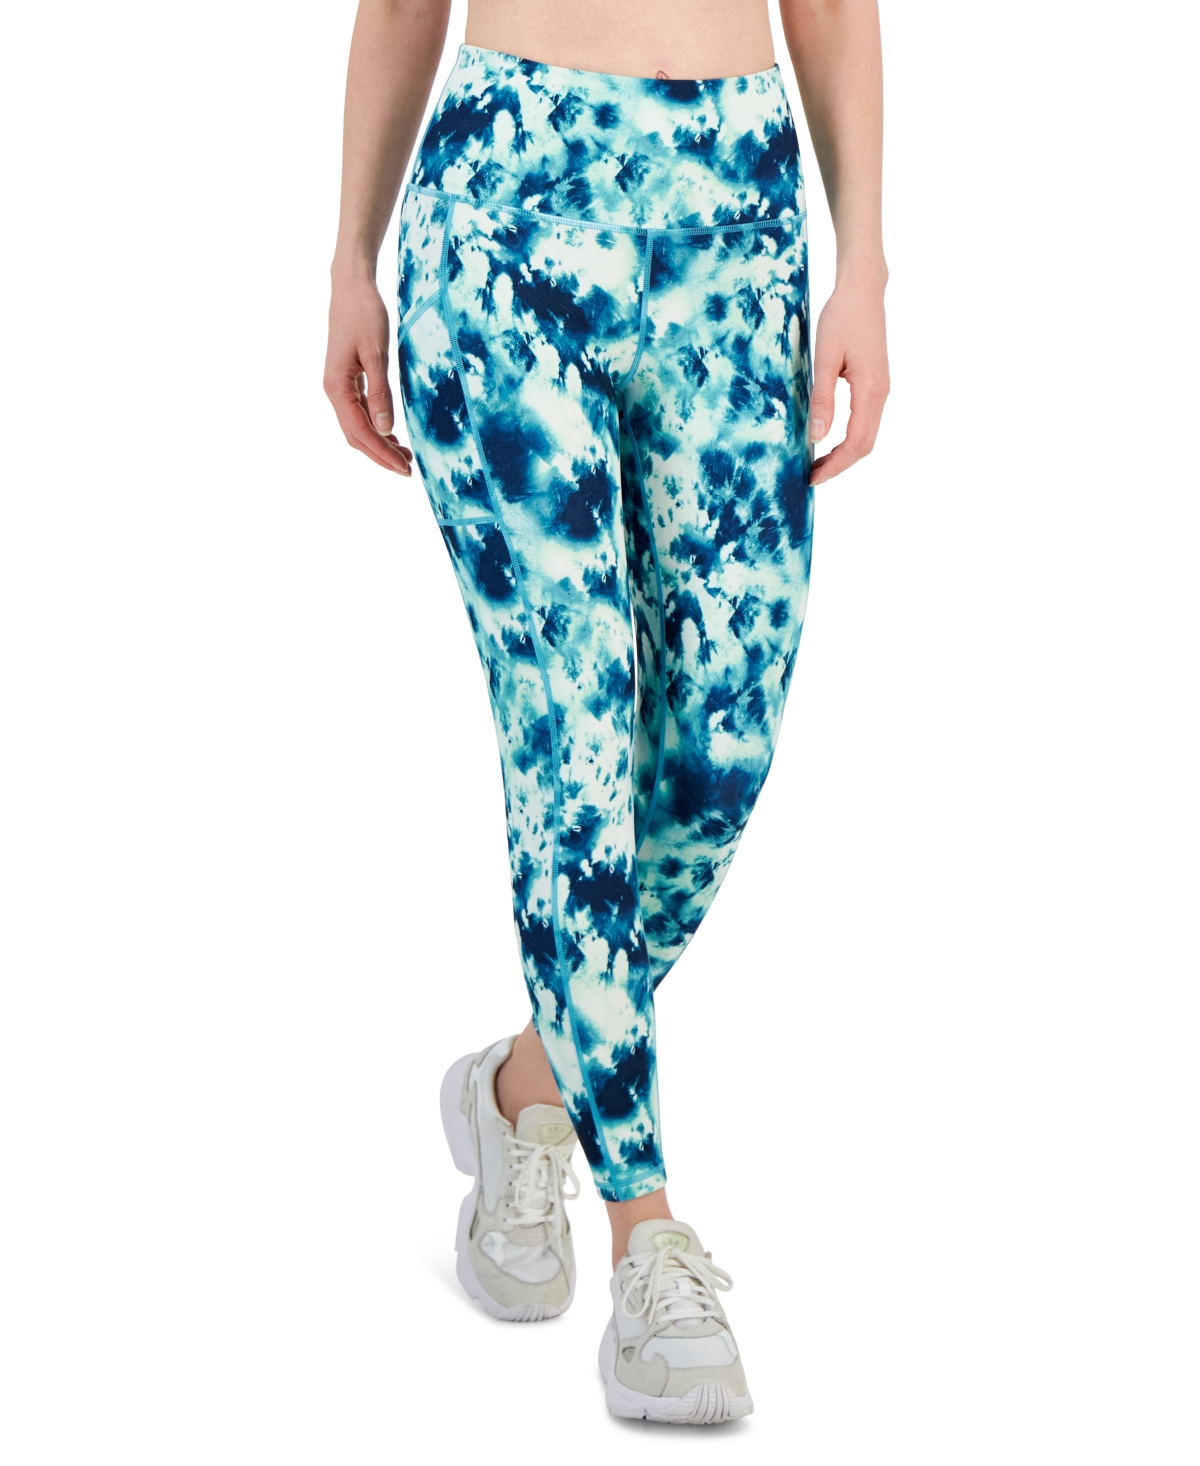 ID IDEOLOGY WOMEN'S COMPRESSION PRINTED 7/8 LEGGINGS, CREATED FOR MACY'S